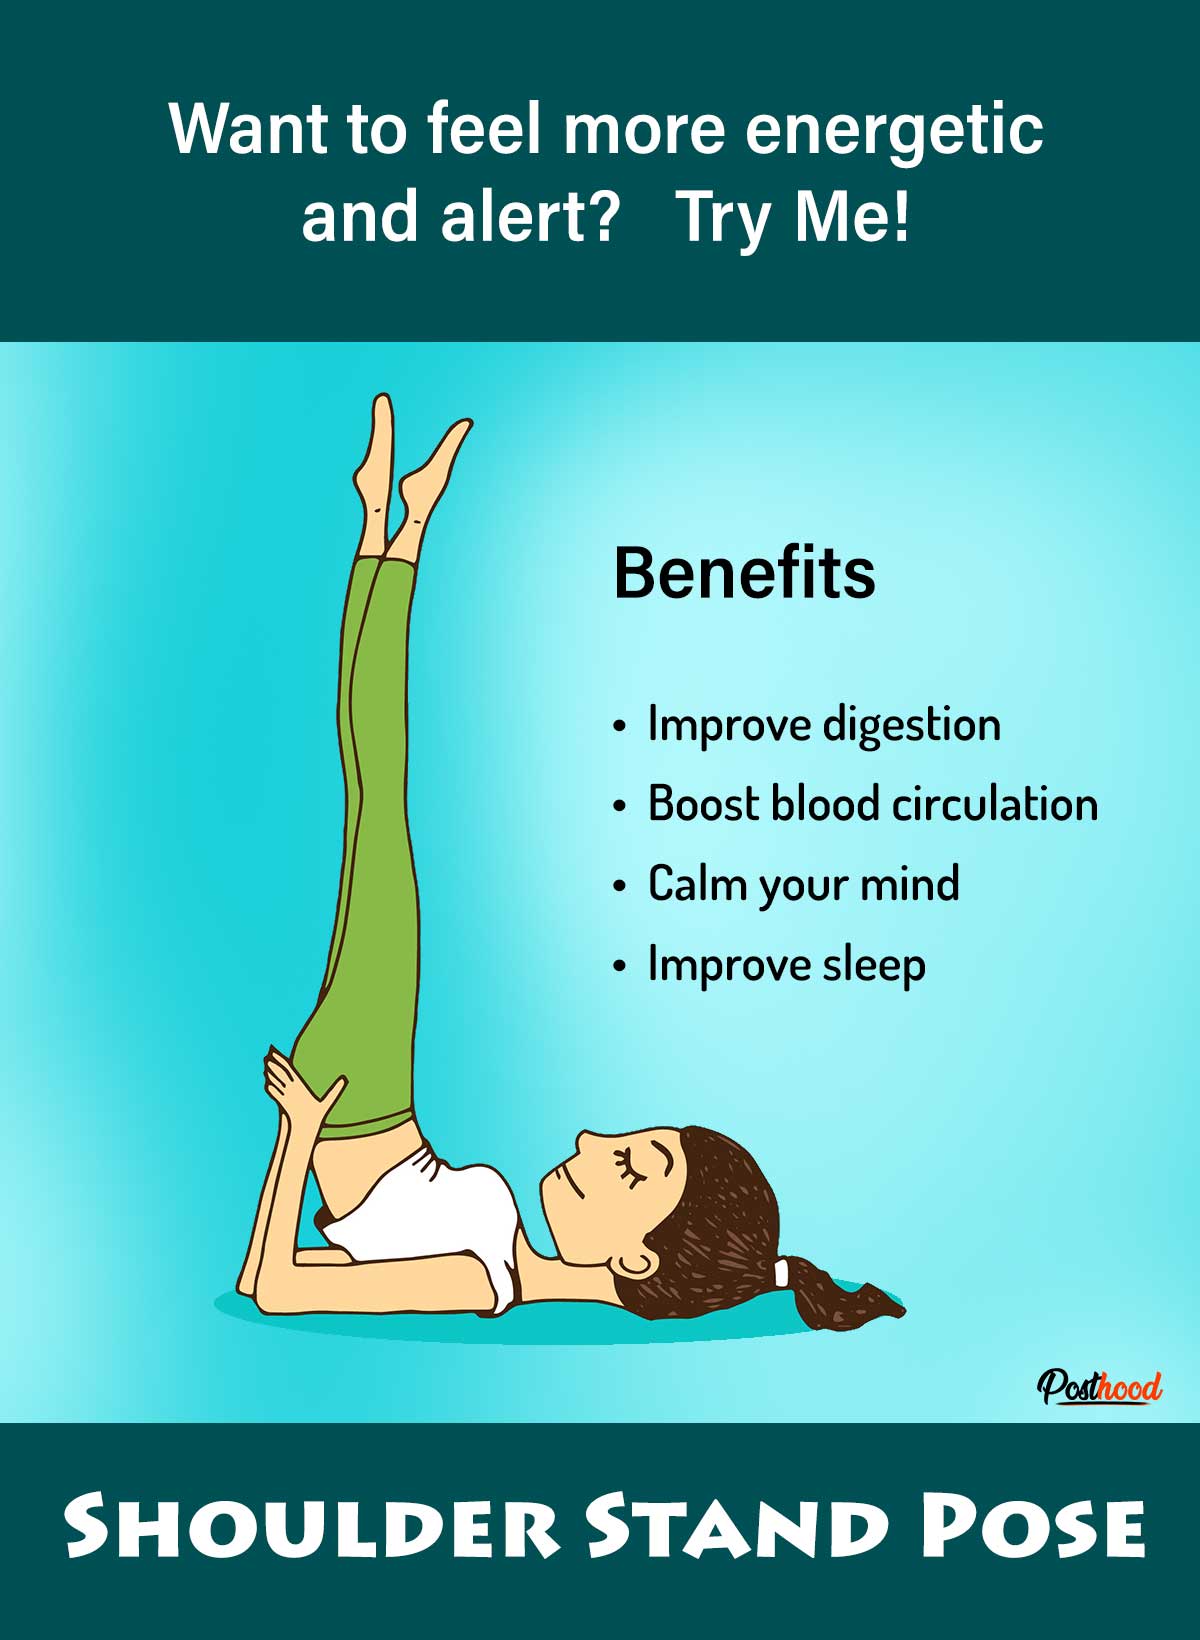 Best morning yoga poses that you should practice every day for more energetic and productive day. Boost your everyday performance with these easy-to-do yoga poses.